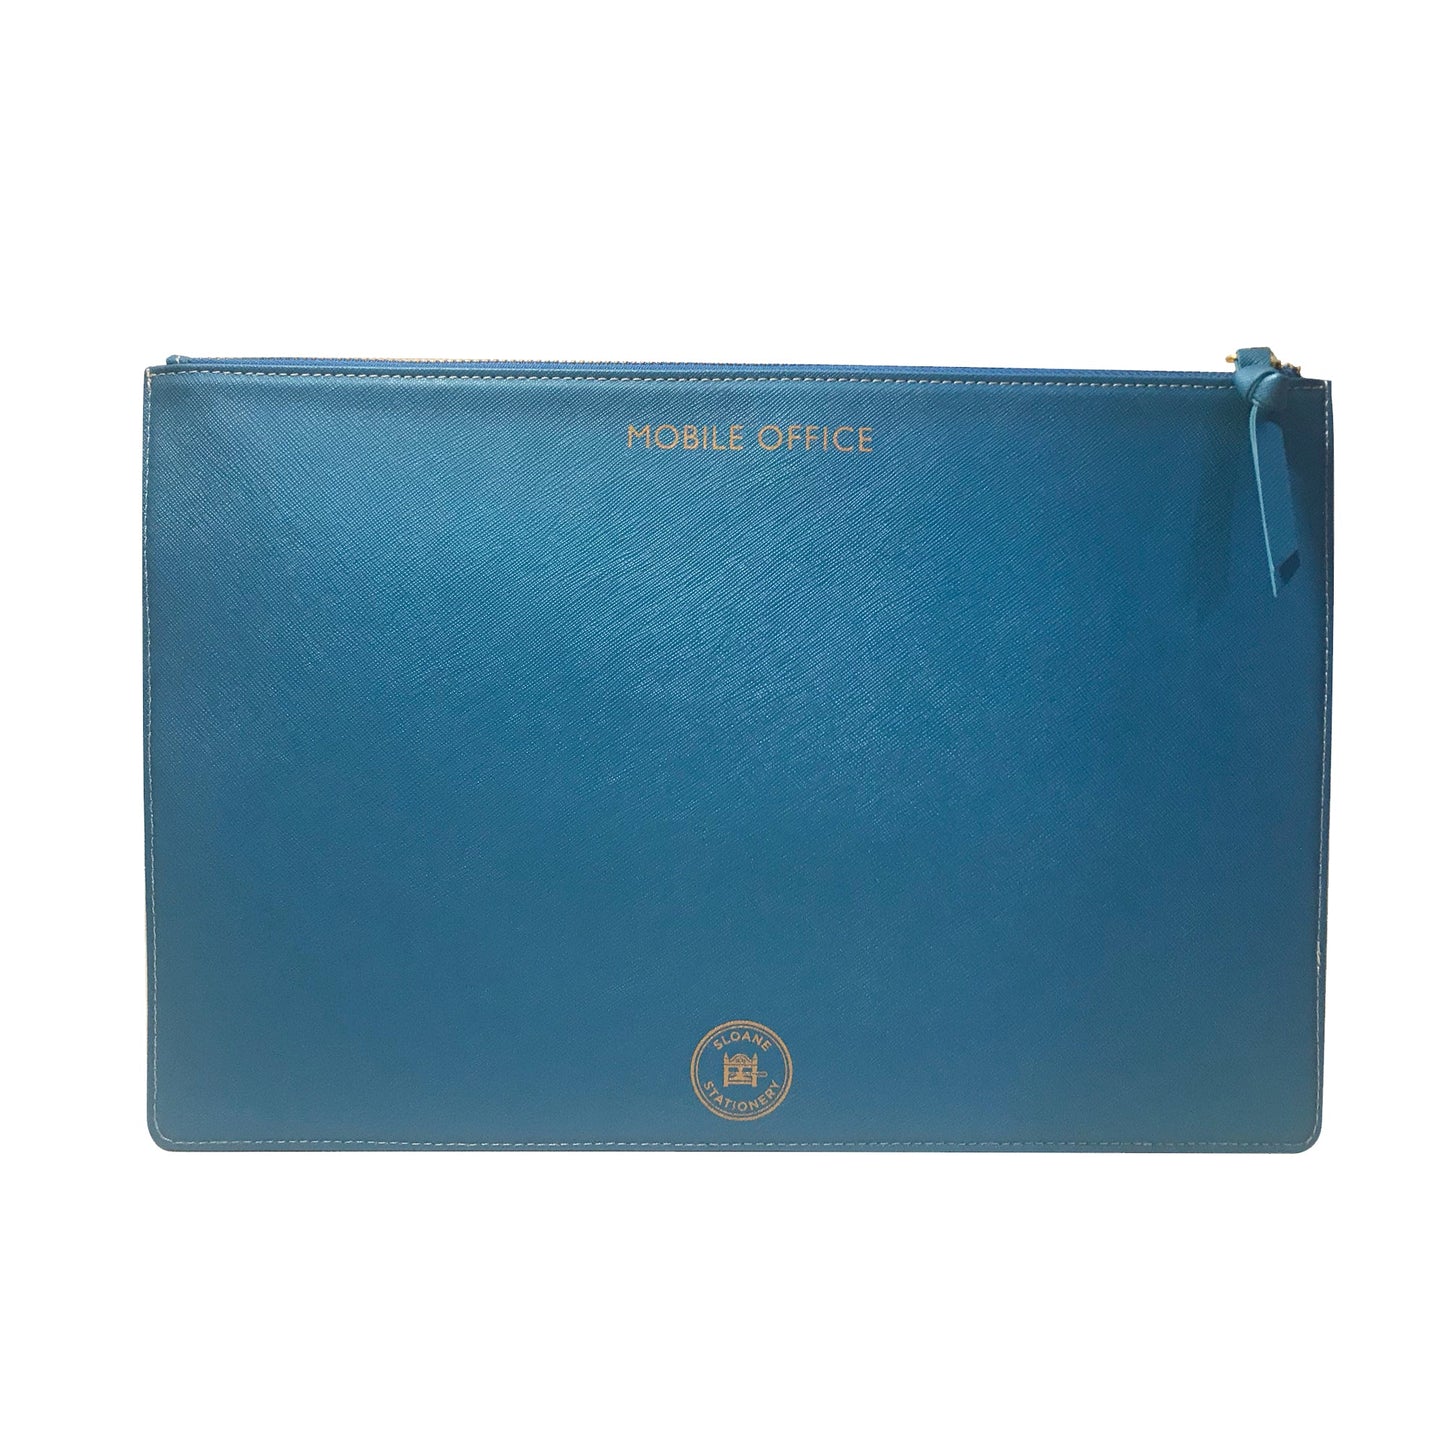 Mobile Office - Large Clutch Pouch